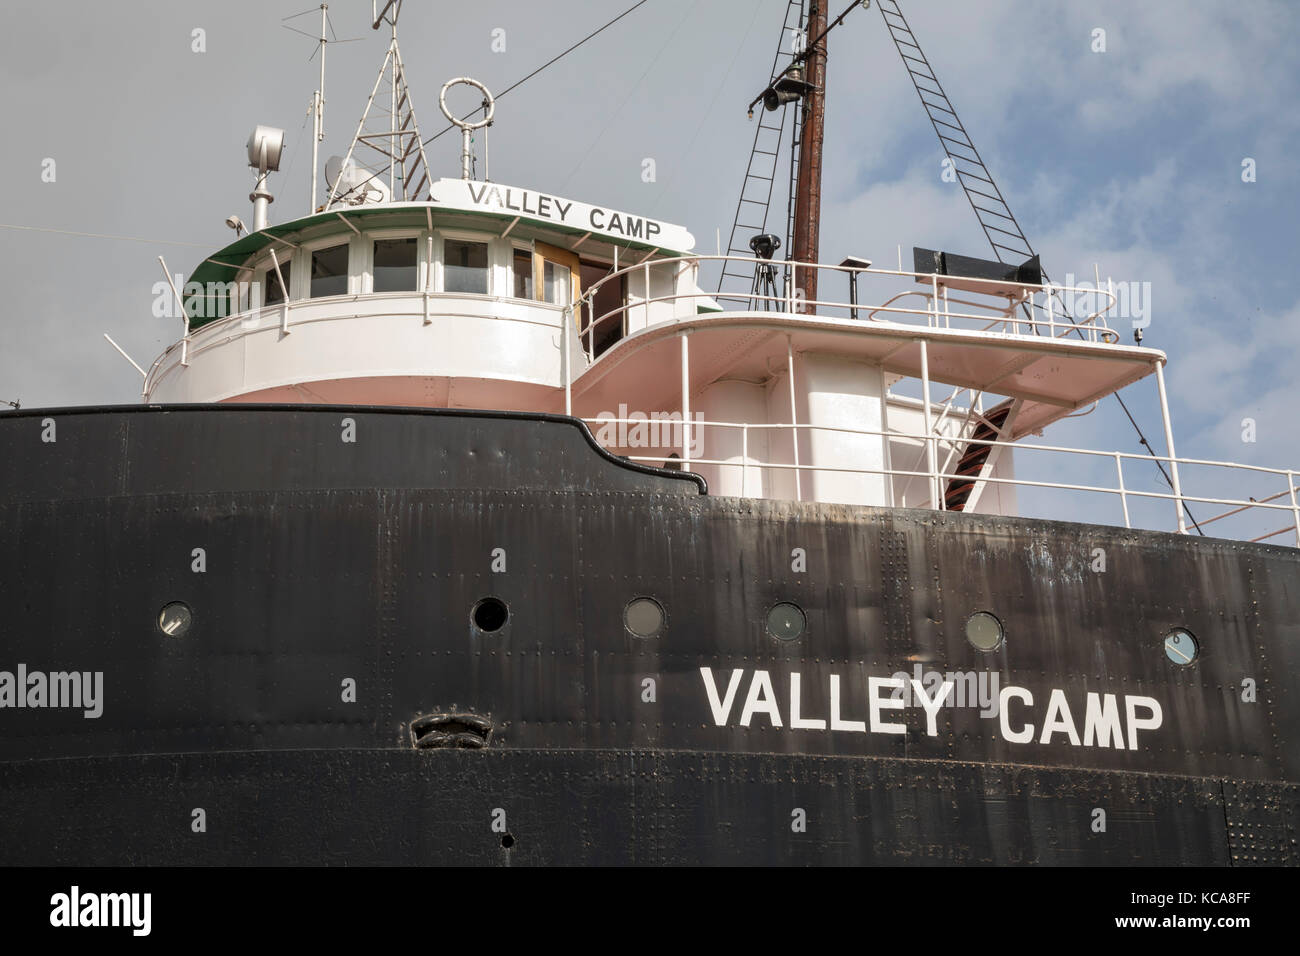 Sault Ste Marie, Michigan - The Valley Camp, a retired Great Lakes freighter formerly owned by Republic Steel, now a maritime museum. Stock Photo